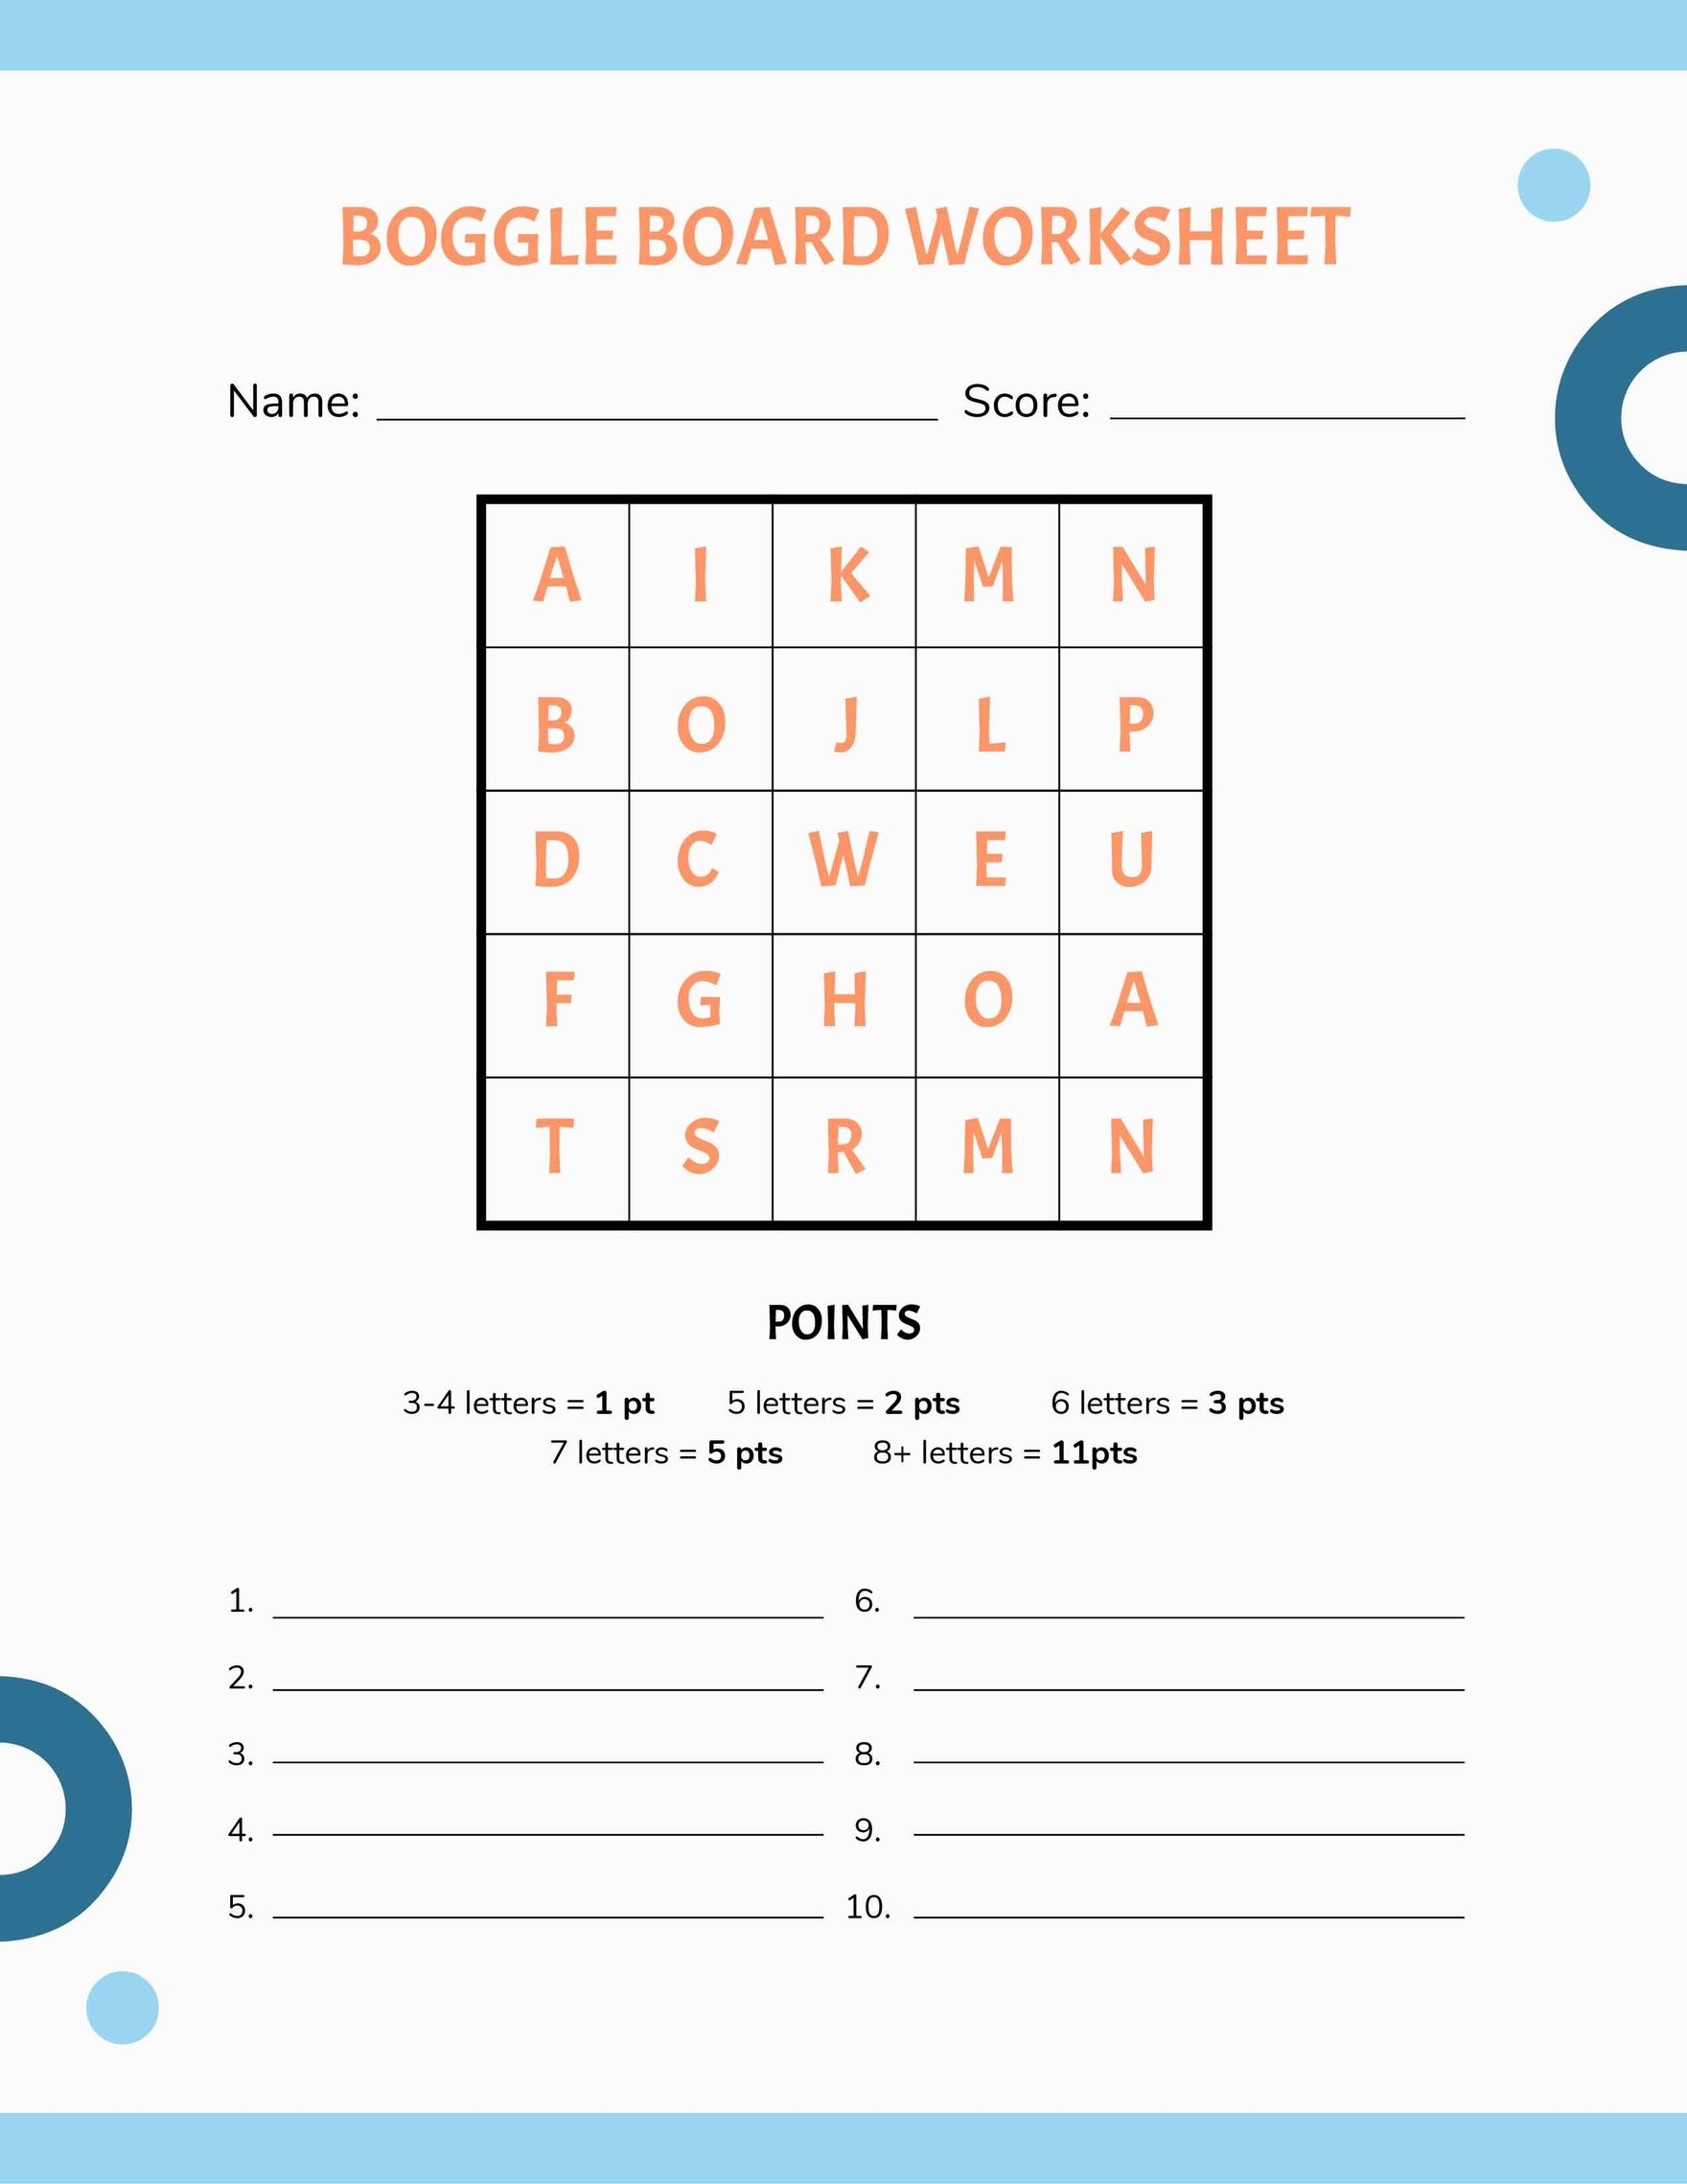 game-boggle-for-kids-101-activity